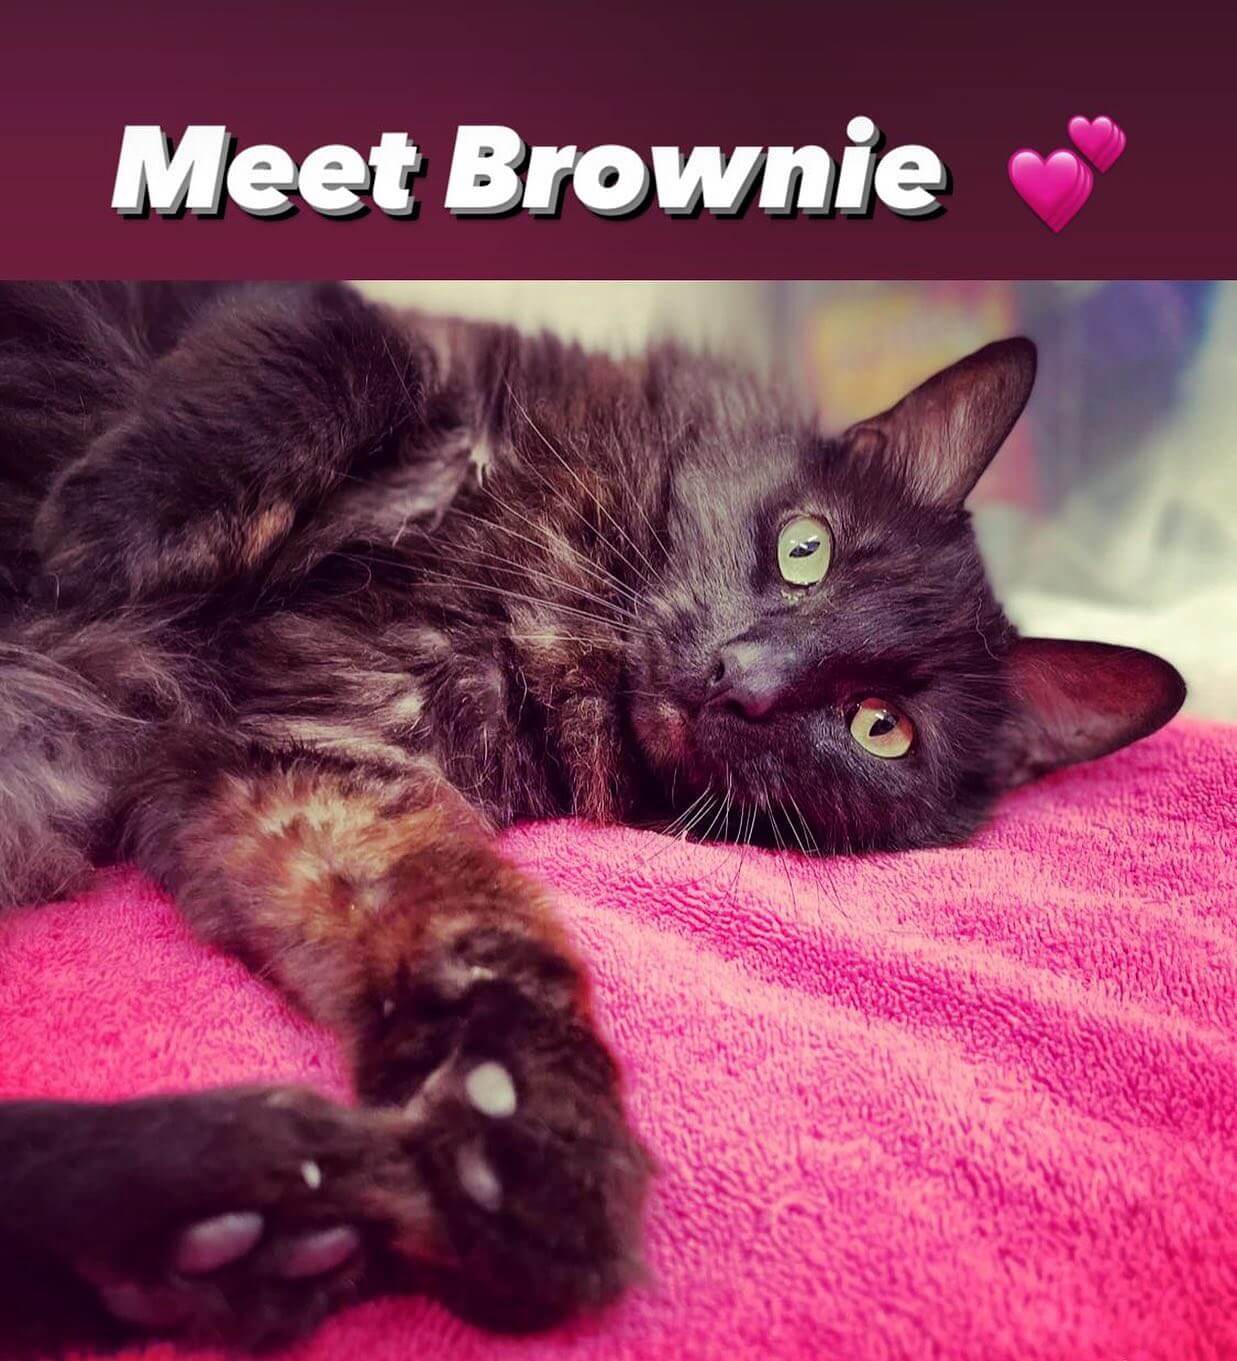 Let me introduce to you Brownie! 🤎

At eight years old, she’s firmly in middle age for a house cat, with many years of love left to give. There’s been some debate about the color of this beauty’s fur – is it brown, is it black? What’s going on? Friends. It doesn’t really matter that much, because look at that silver white undercoat of hers! It’s the black smoke coloration and it’s not entirely uncommon, but is nevertheless very interesting and lovely. I would say her fur alone makes a great conversation starter for sure… 😺

And now that it’s started, let’s talk about what a wonderful little cat Brownie is. Like the confection she’s named after, she’s gooey and sweet, and yet the edges have a bit of a crispy chew. That’s not in a bad way - some people prefer the chewy edge pieces. Brownie loves to be brushed, until she’s done. Brownie loves to be petted, until she doesn’t. Brownie likes people, is not fussed about other kitties. Within seconds of meeting her, she was trying to rub her face against mine and giving me tiny mrrps and chirrups. 🥮

Brownie is a pretty typical cat, love her on her terms and you’ll get along great. In return for adhering to her rules you’ll get an amazing, chatty sweetheart with the added bonus of her bicolor dream coat. 🐾

Forget the other sweets, go get yourself the perfect Brownie.

http://clatsopcounty.animalshelternet.com/adoption_animal_details.cfm?AnimalUID=275393

Pet meet and greets are by appointment only, so if you’d like to meet Brownie, submit an application 503-861-PETS
#adoptdontshop #adoptdontshop #astoriaoregon #seasideoregon #cannonbeachoregon #pnw #pnwonderland #oregoncoast #giveback #volunteer #clatsopcounty #clatsopcountyanimalshelter #sheltercat #shelterdog #clatsopanimalassistance